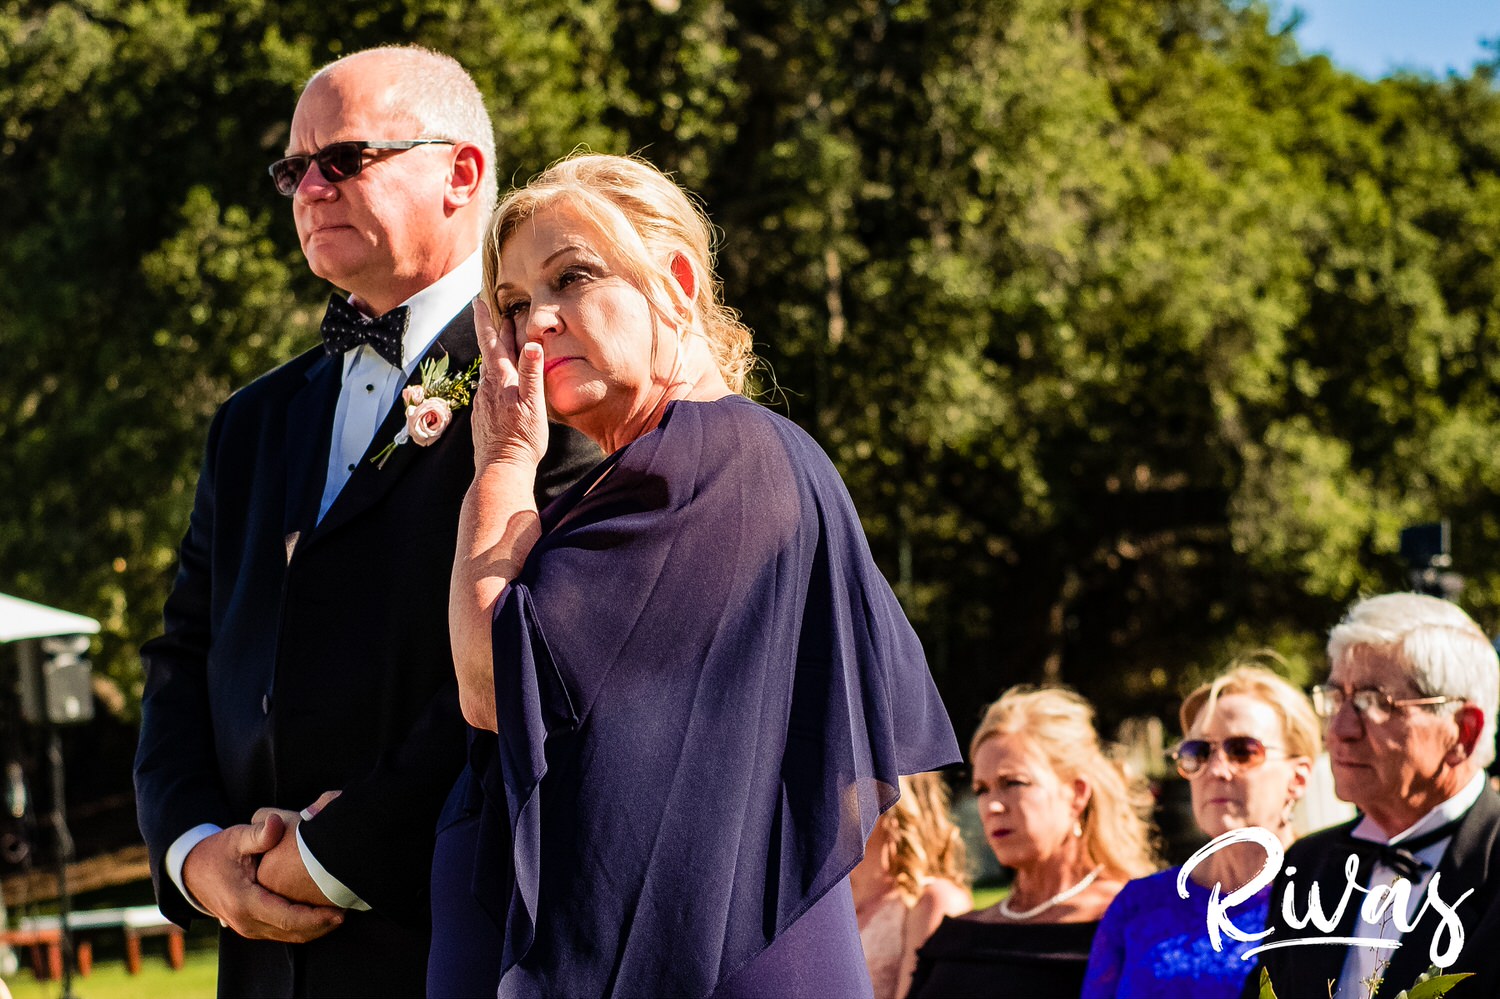 Saddlerock Ranch Summer Wedding | Destination Wedding Photographers | Rivas | A candid image of the groom's mother and father wiping tears from their eyes during their son's wedding ceremony. 